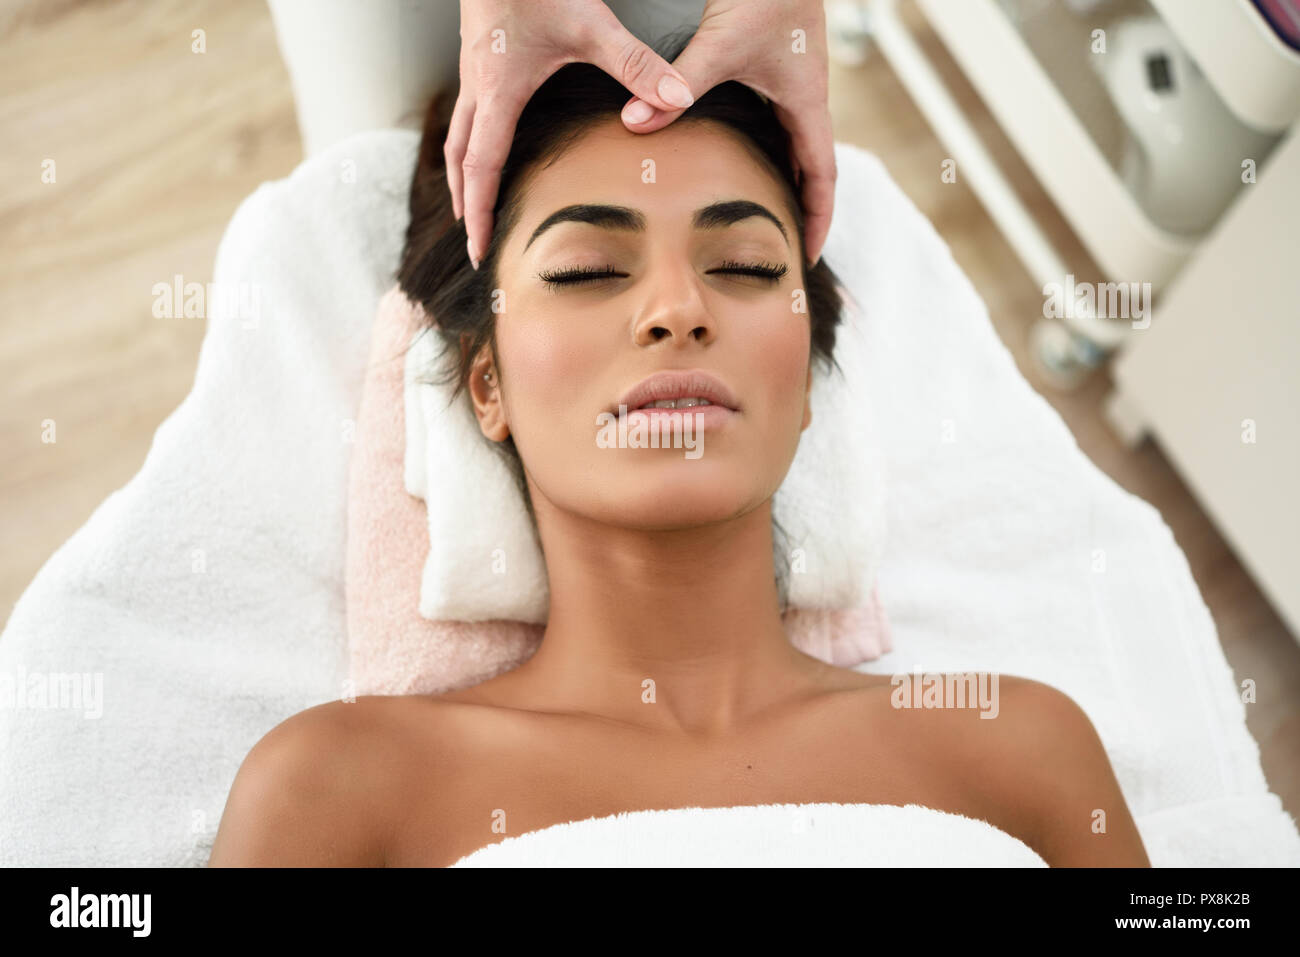 Arab Woman Receiving Head Massage In Spa Wellness Center Beauty And Aesthetic Concepts Stock